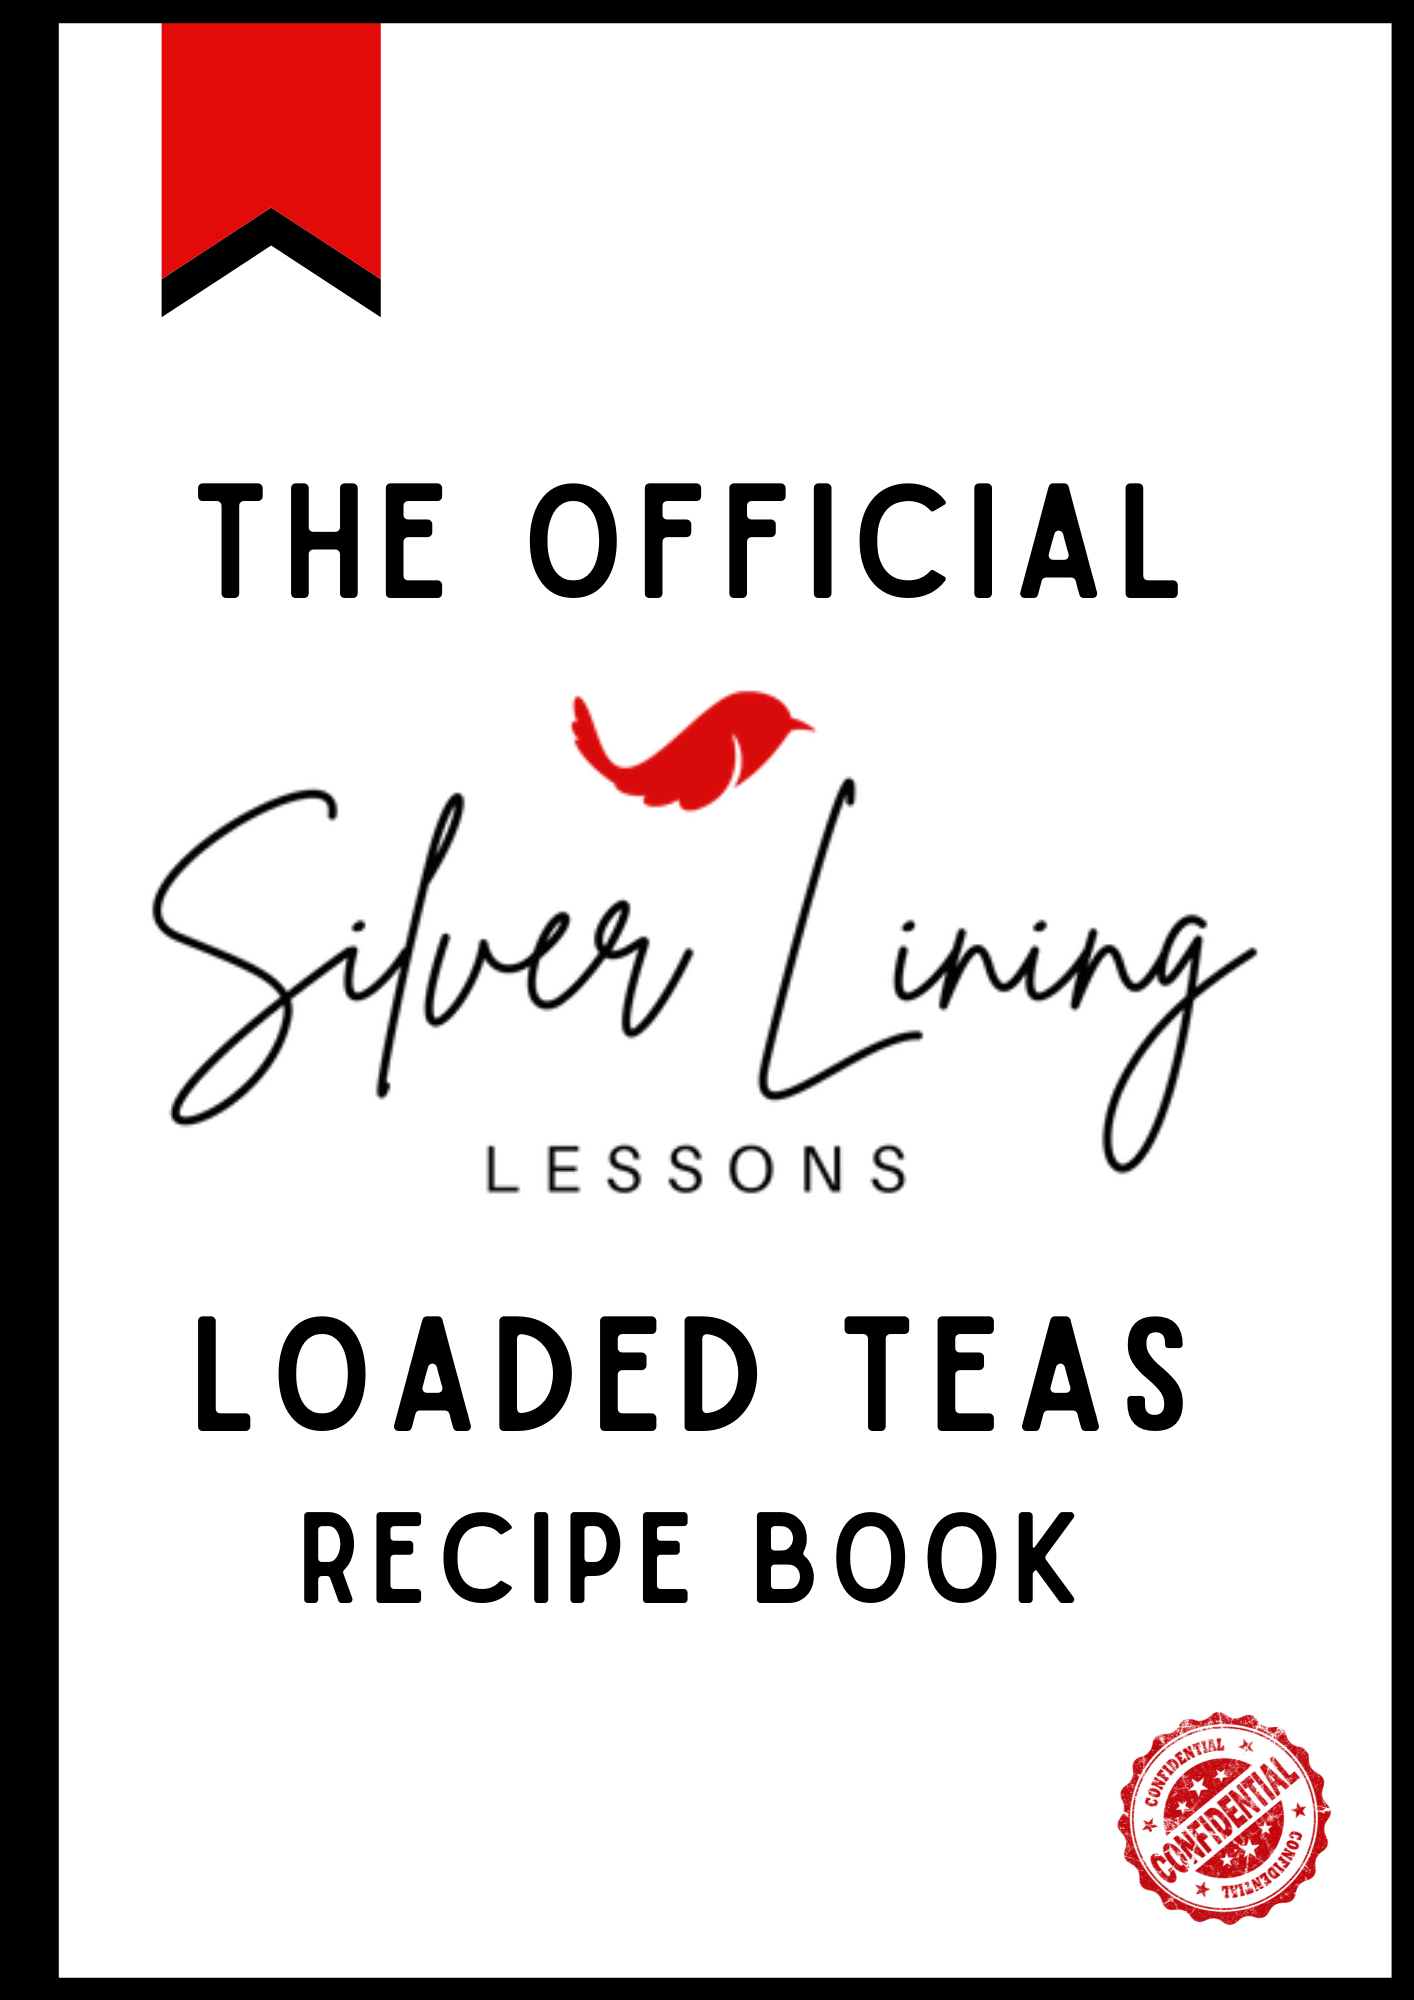 The Official Silver Lining Lessons Tea Recipe Book (download instantly)